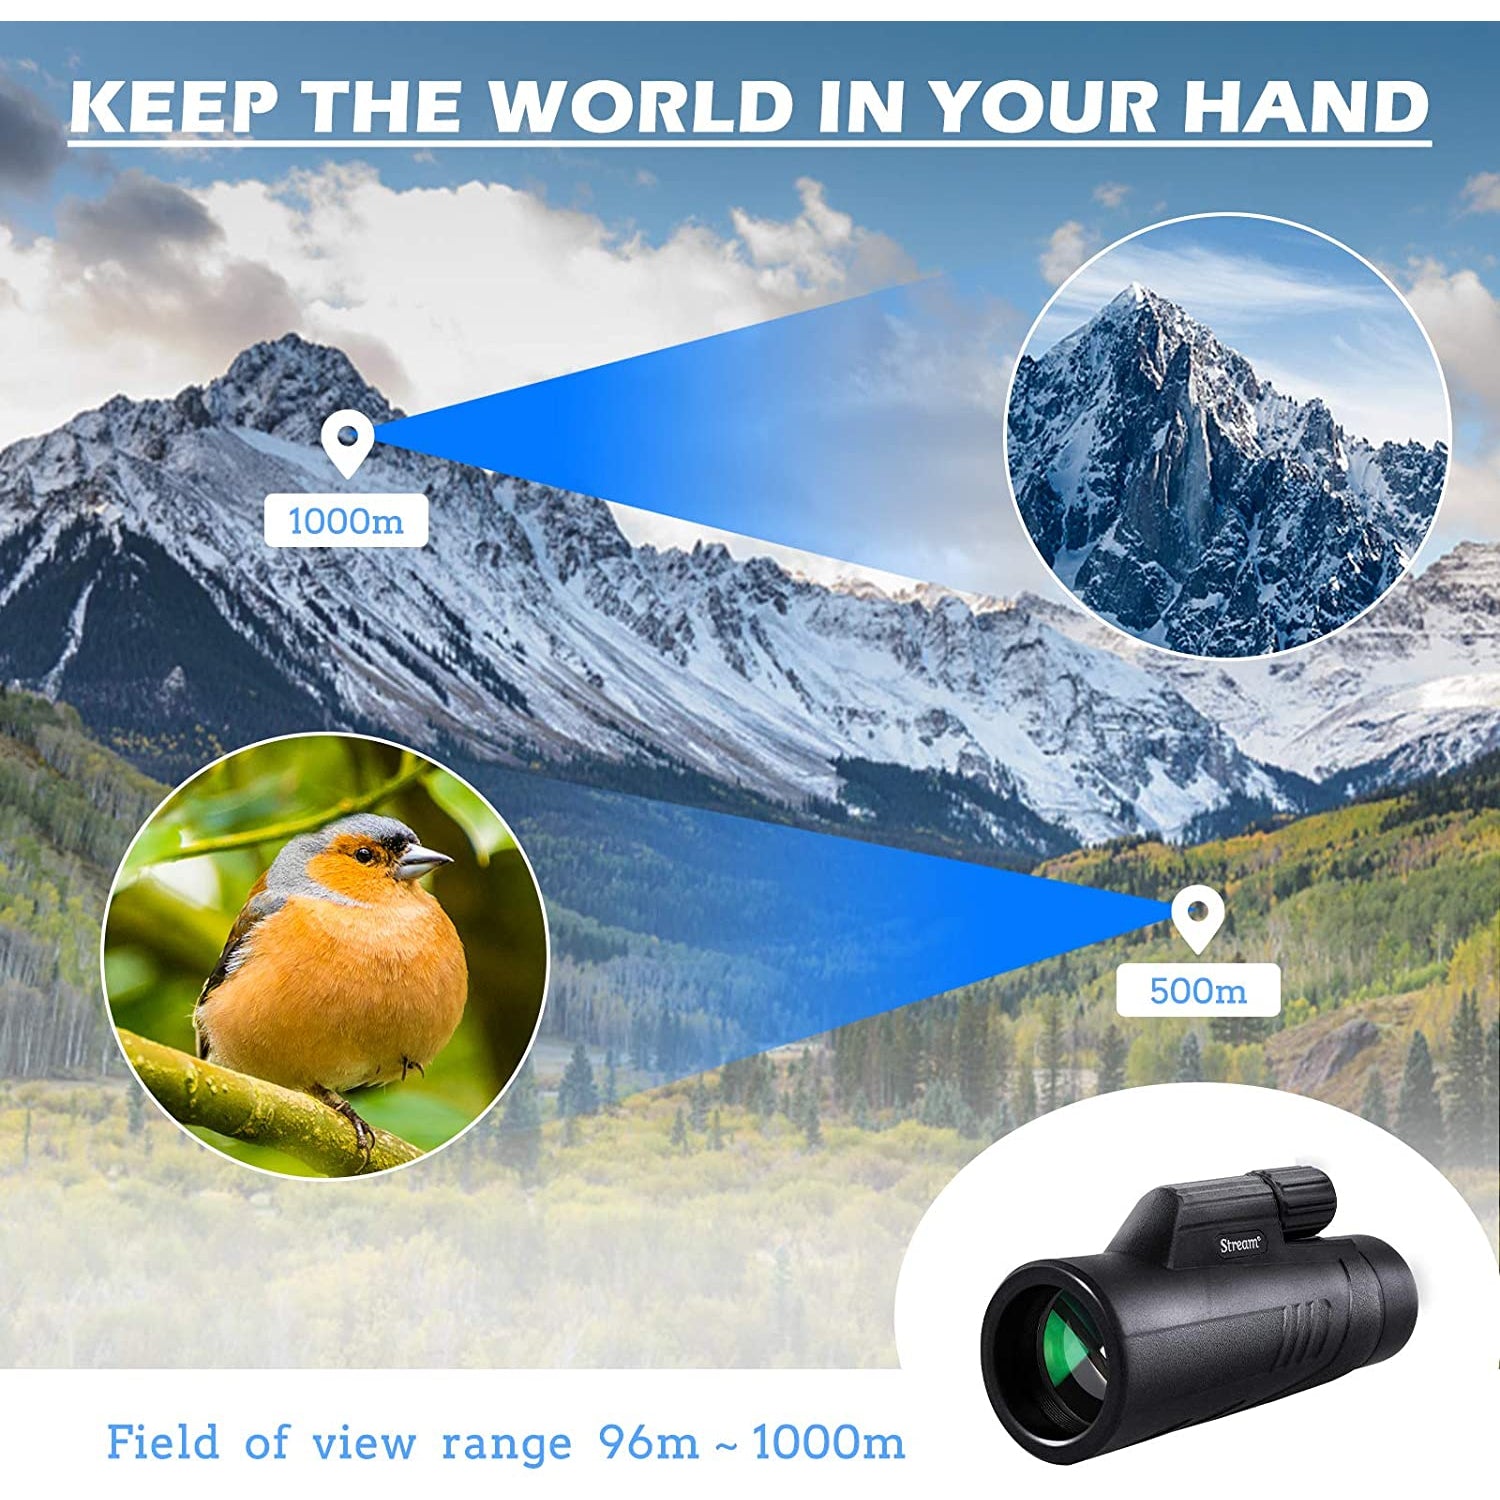 Stream 10X42 FMC Lens Compact Monocular Telescope for Adults